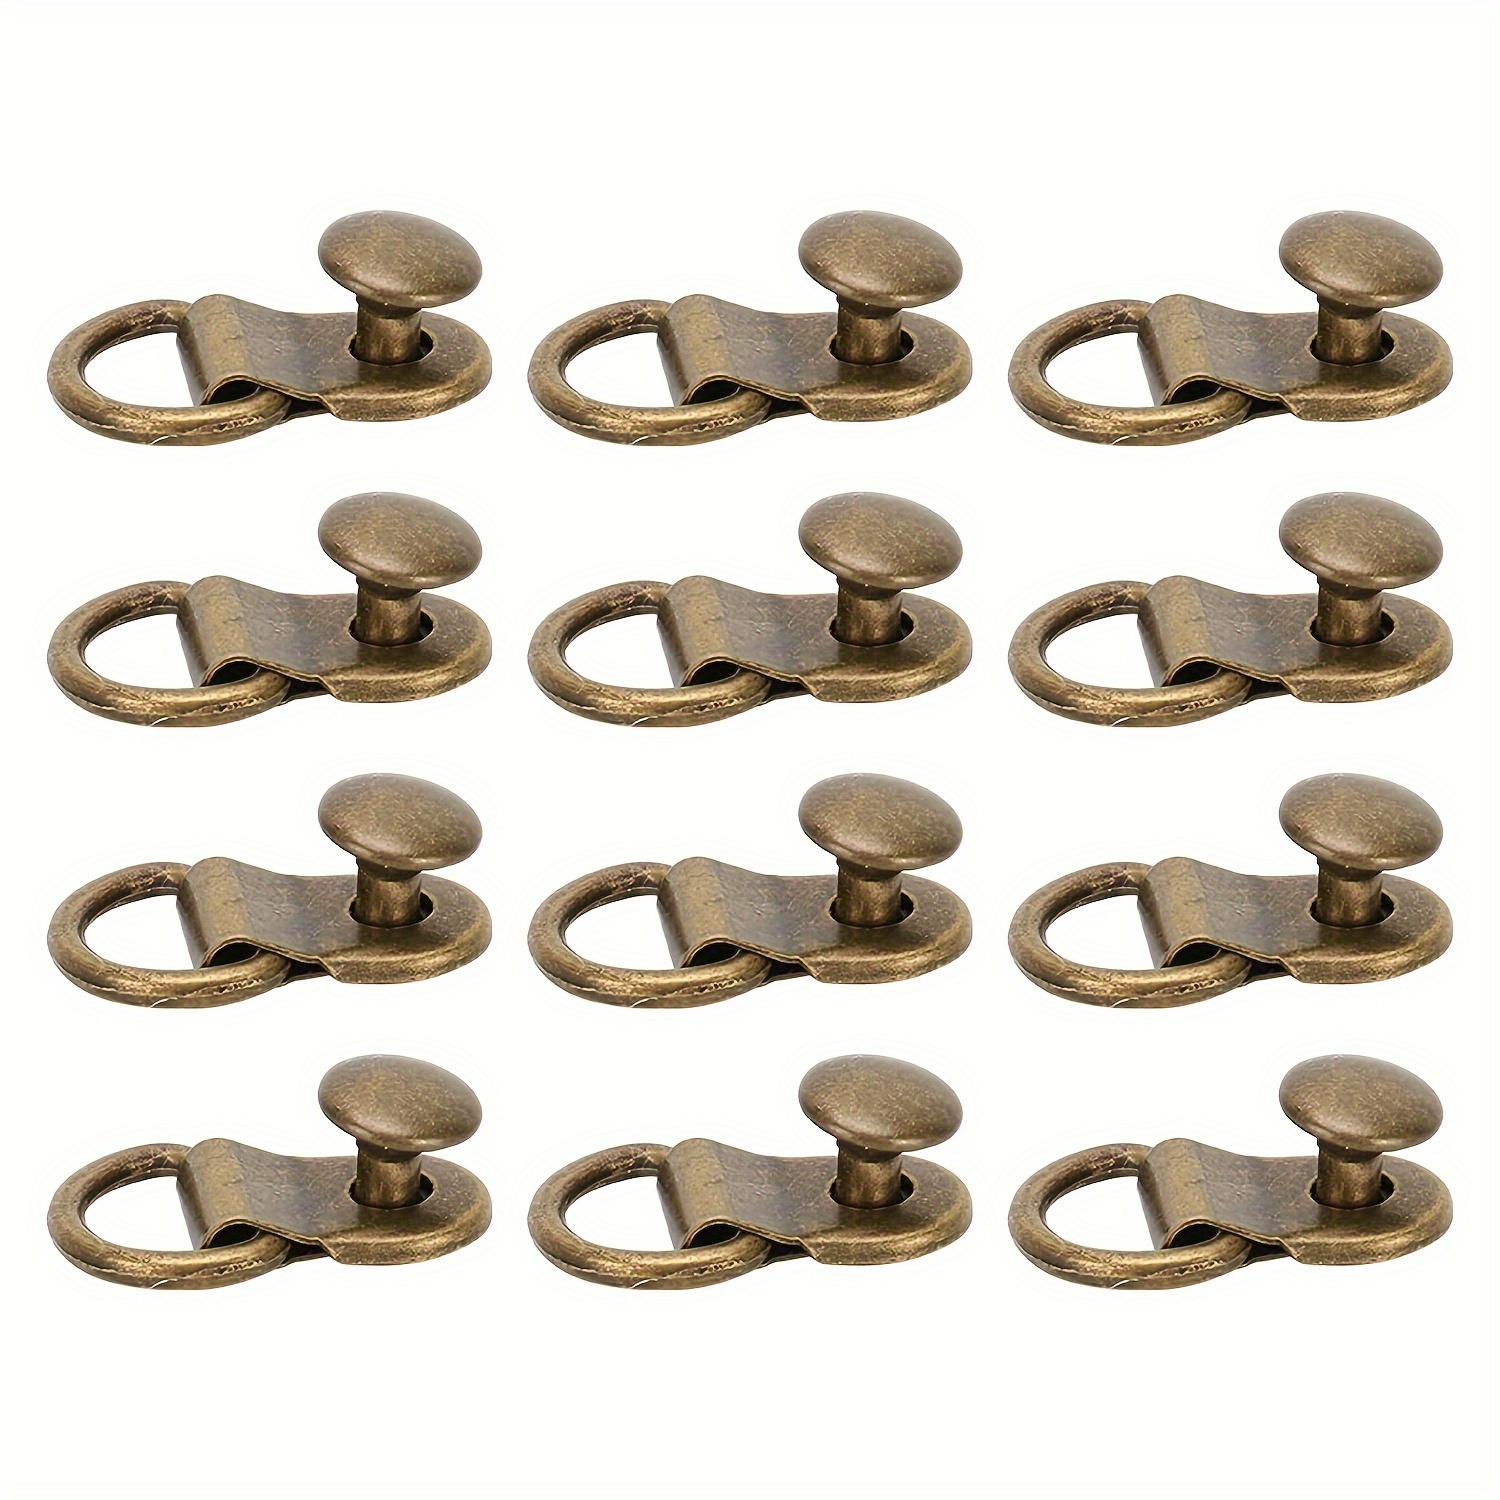 

100 Sets Antique Brass-colored Eyelet Hooks, Lace D-ring Rivets, Leather Hole Punch Fasteners For Diy Shoe Boot Strap And Backpack Repair